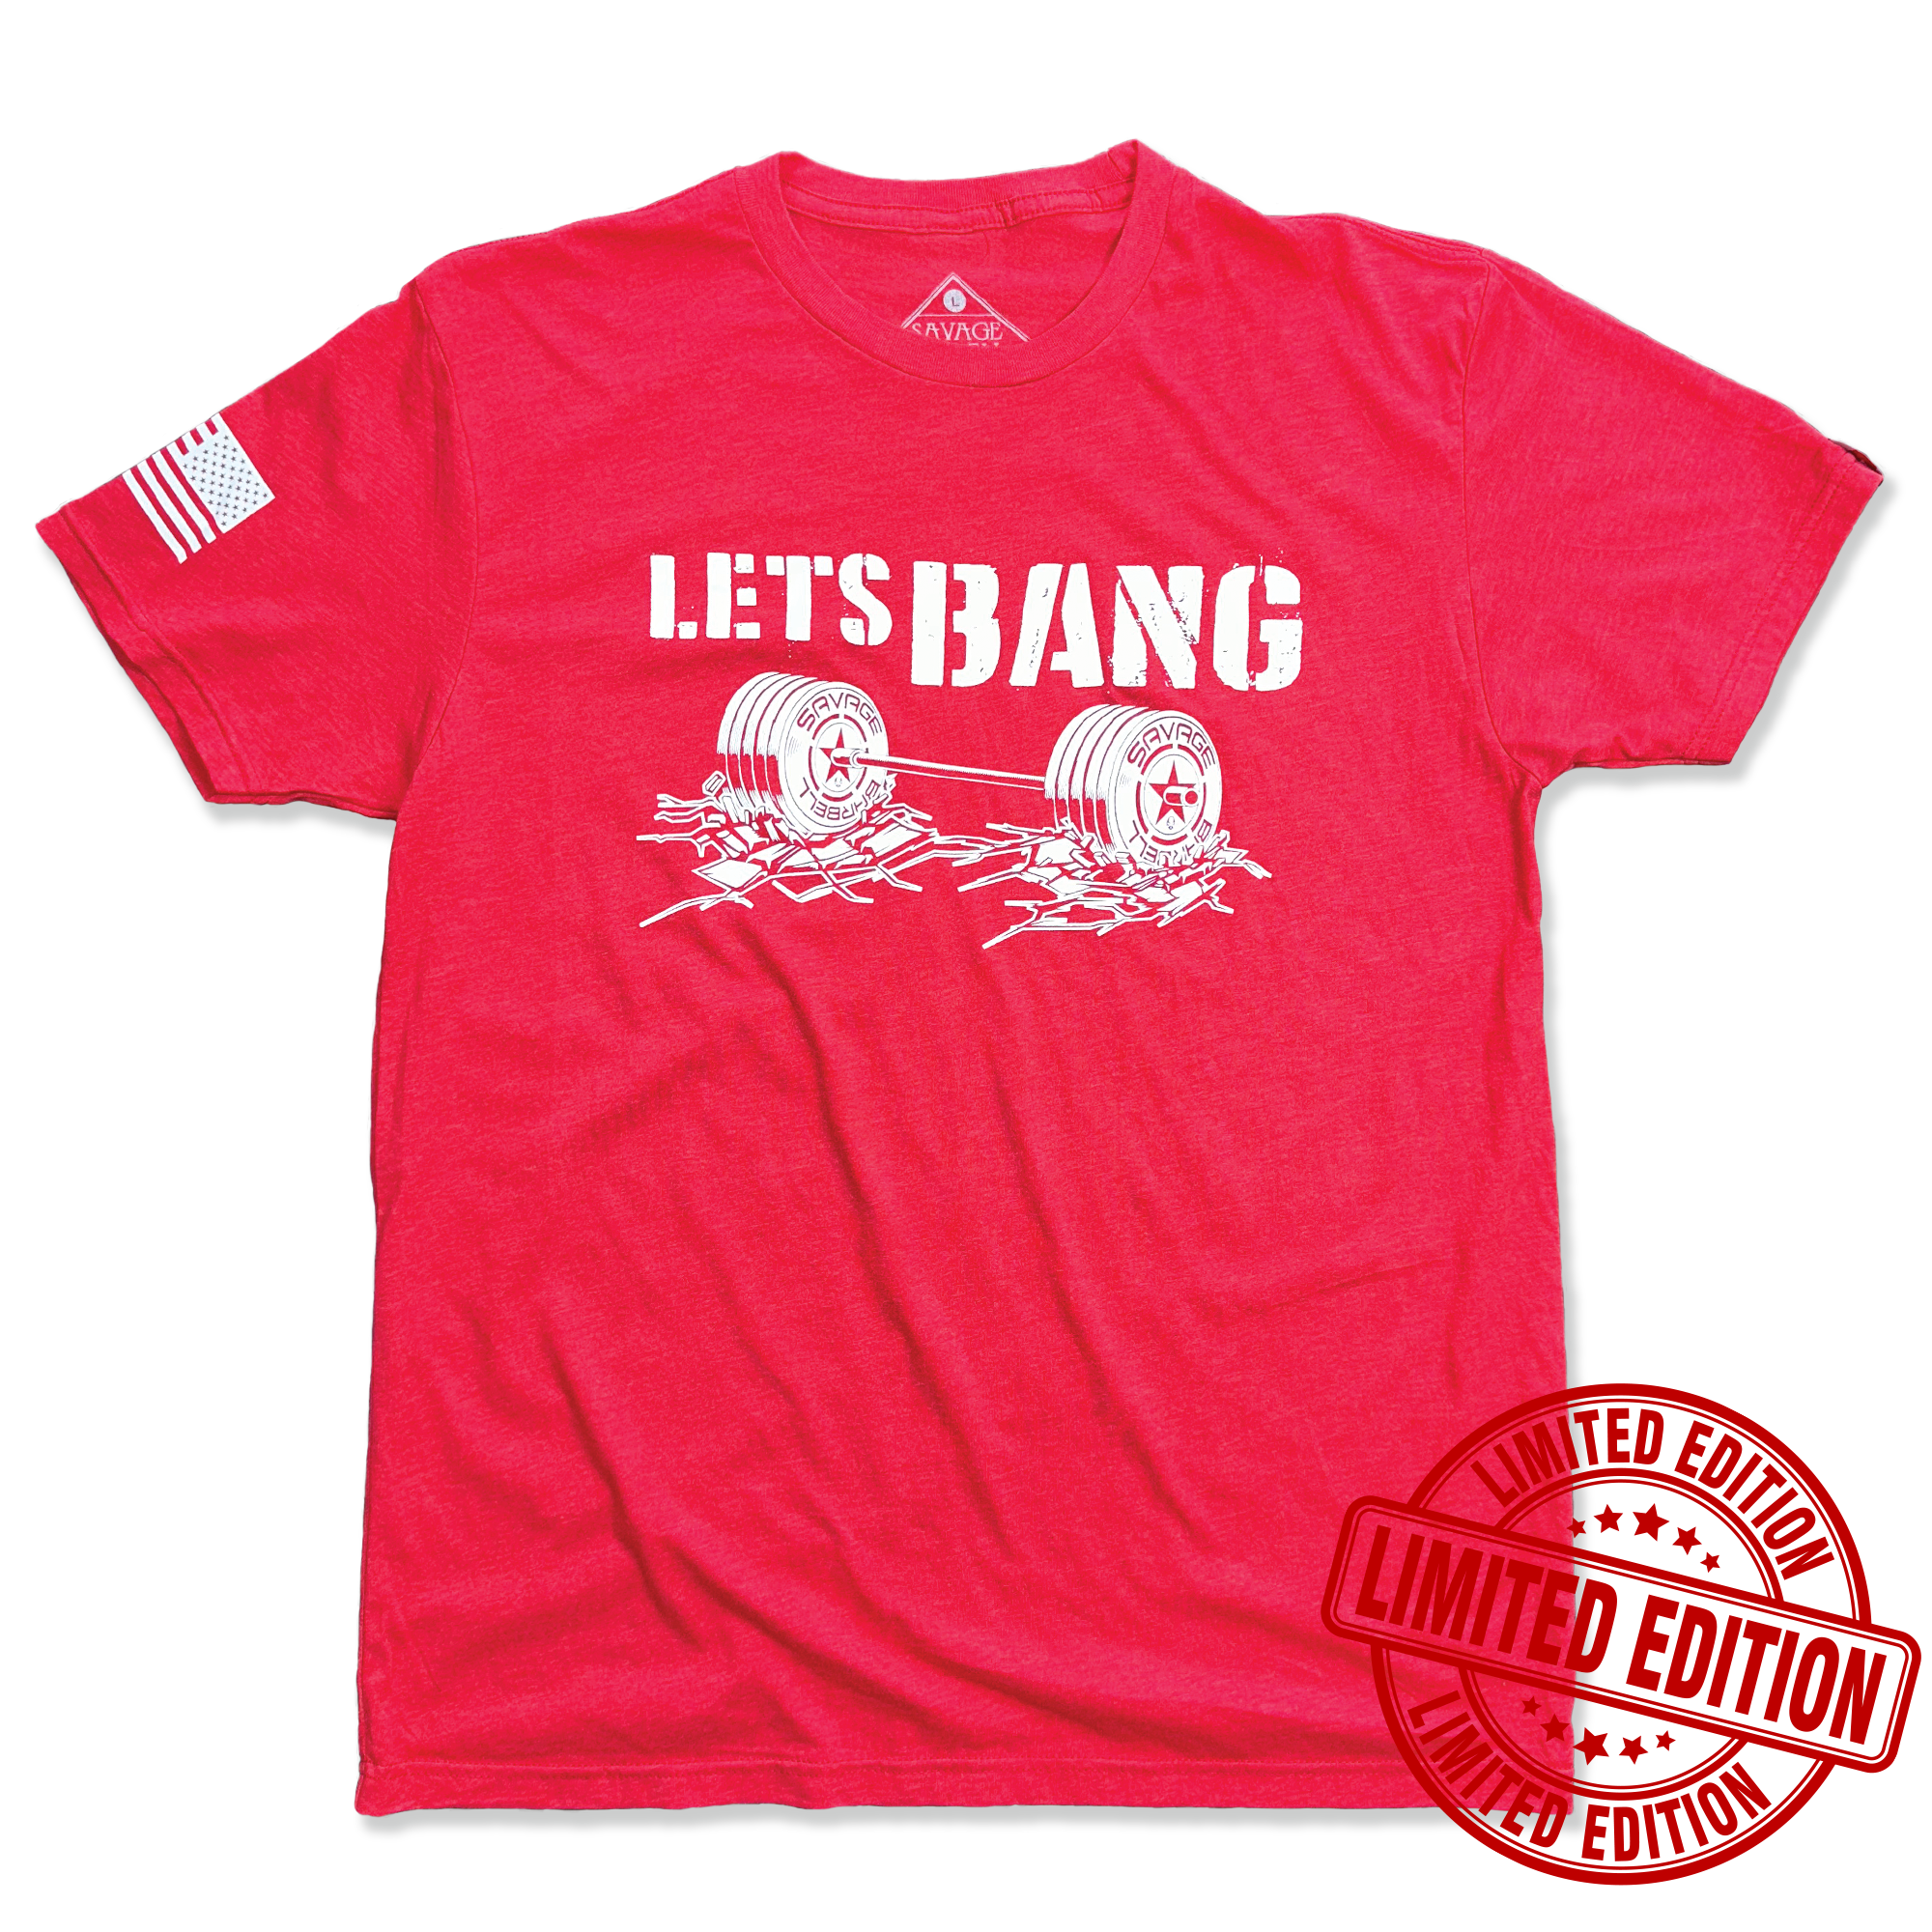 Men's T-shirt - Limited Edition - Let's Bang, 2X-Large / Red product